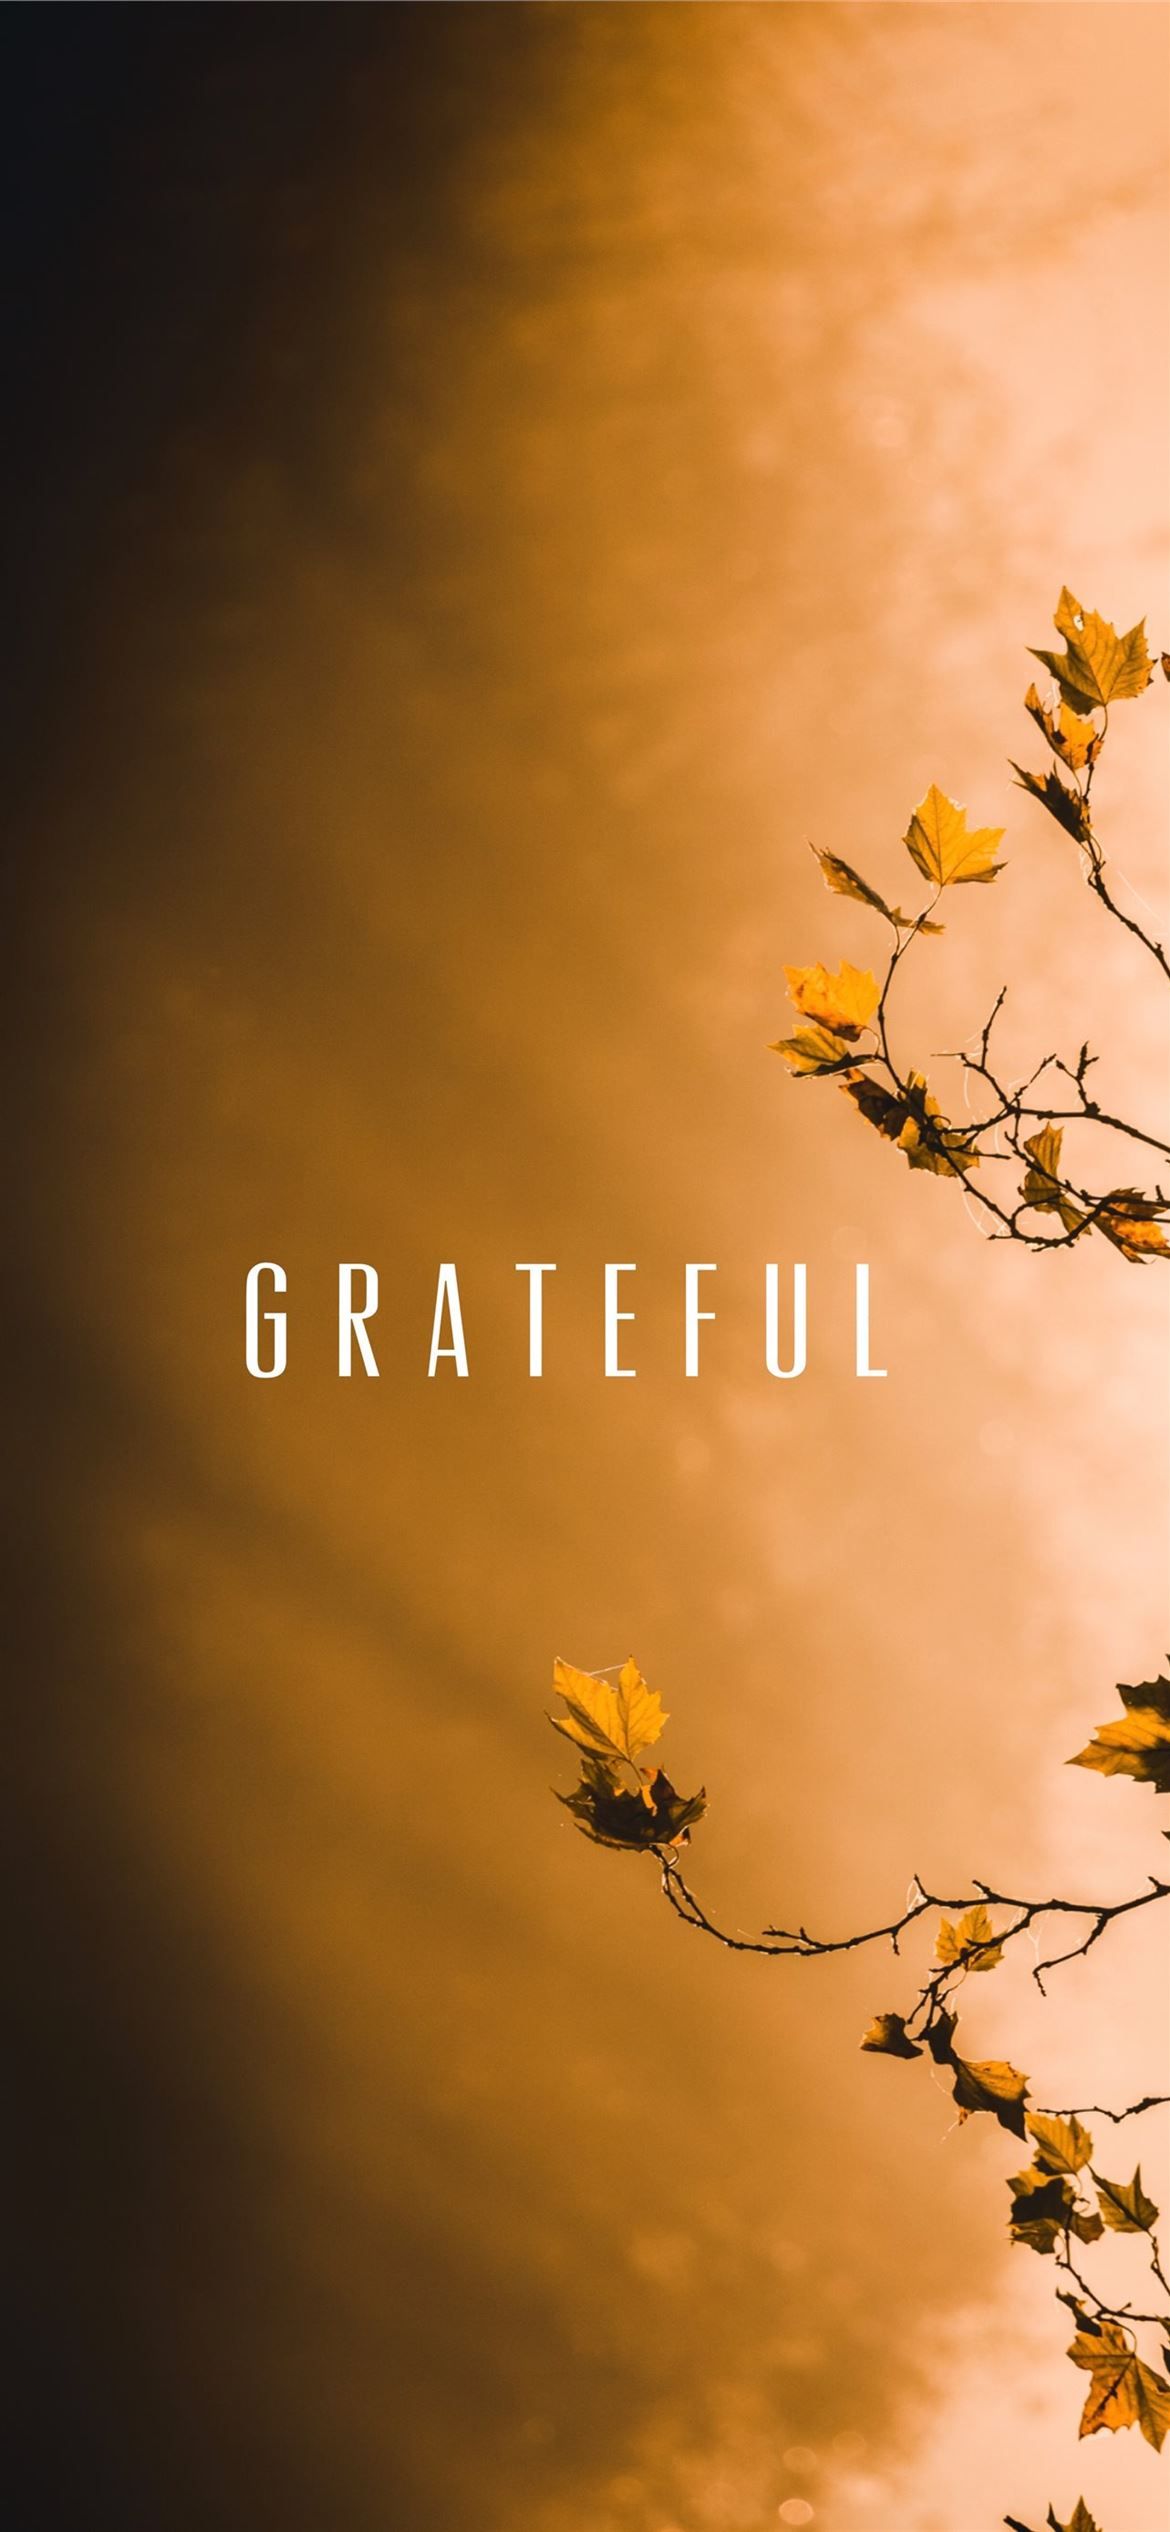 Grateful wallpaper for mobile devices with a tree branch and leaves - Hufflepuff